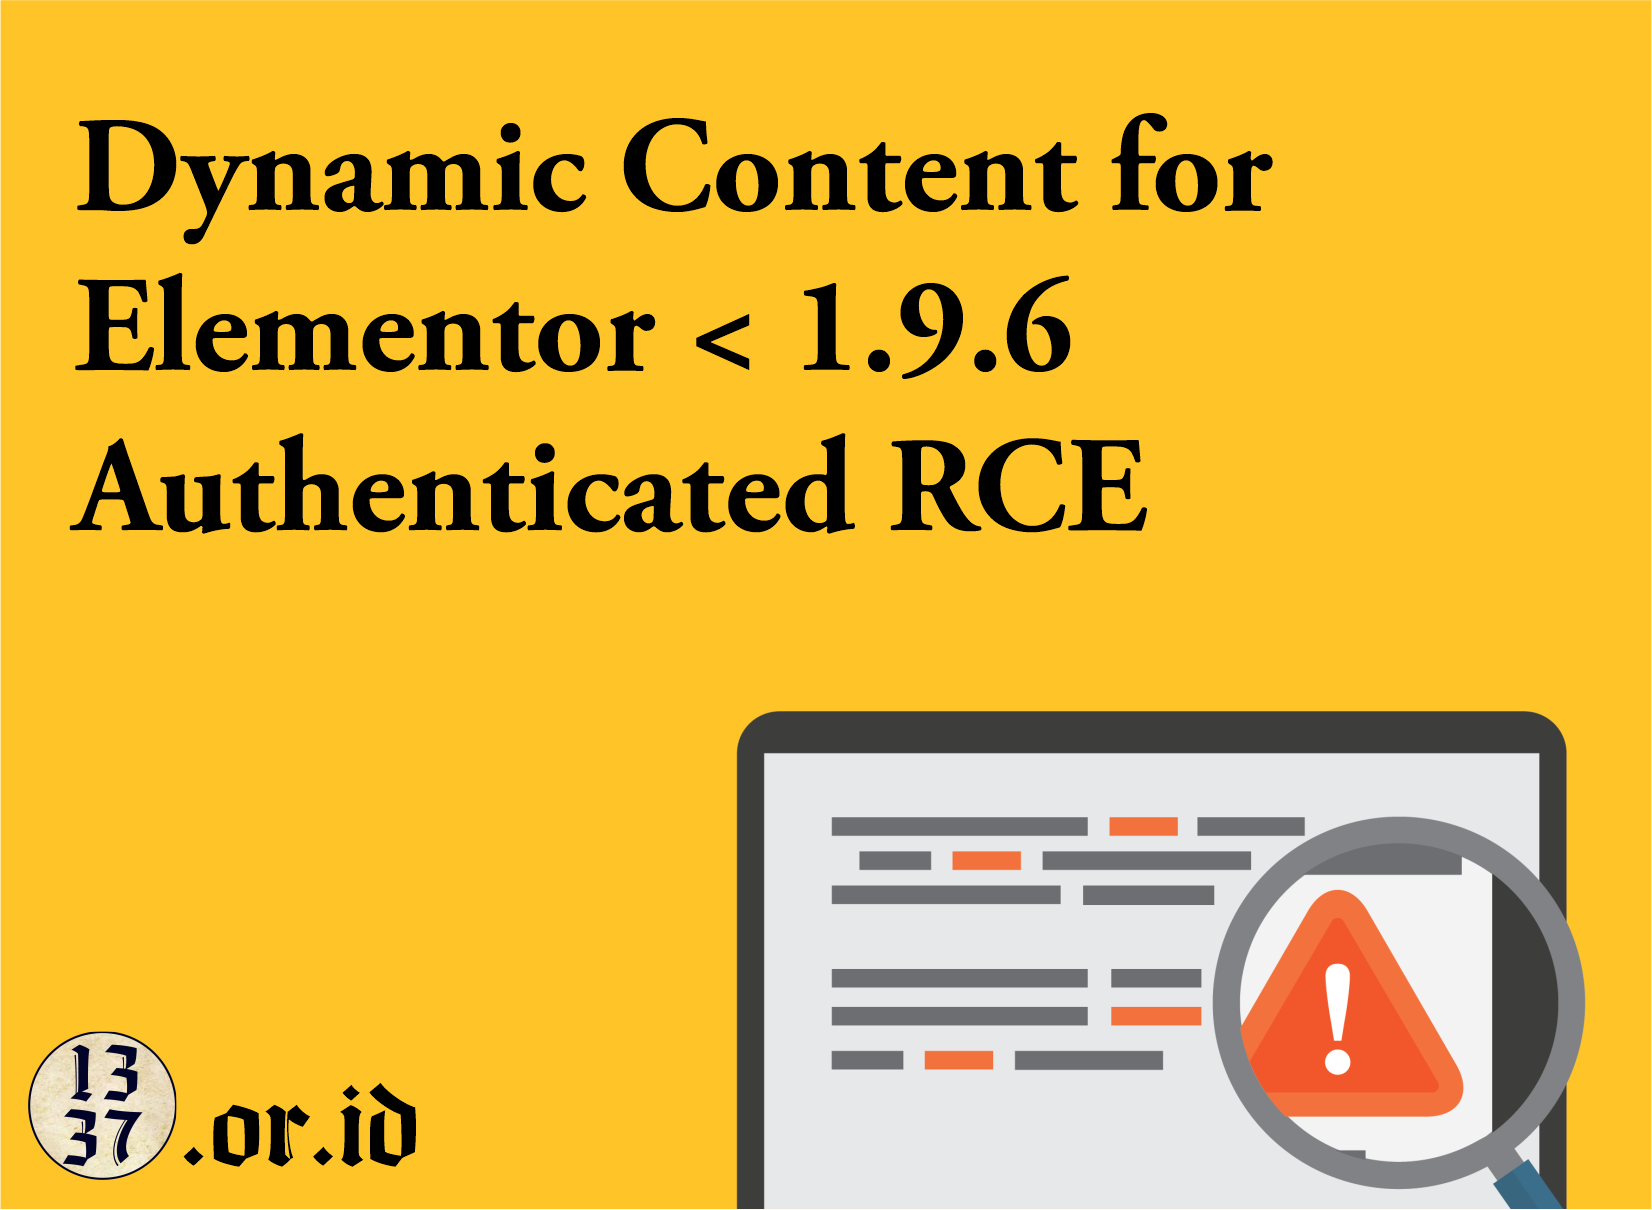 Dynamic Content for Elementor < 1.9.6 - Authenticated RCE